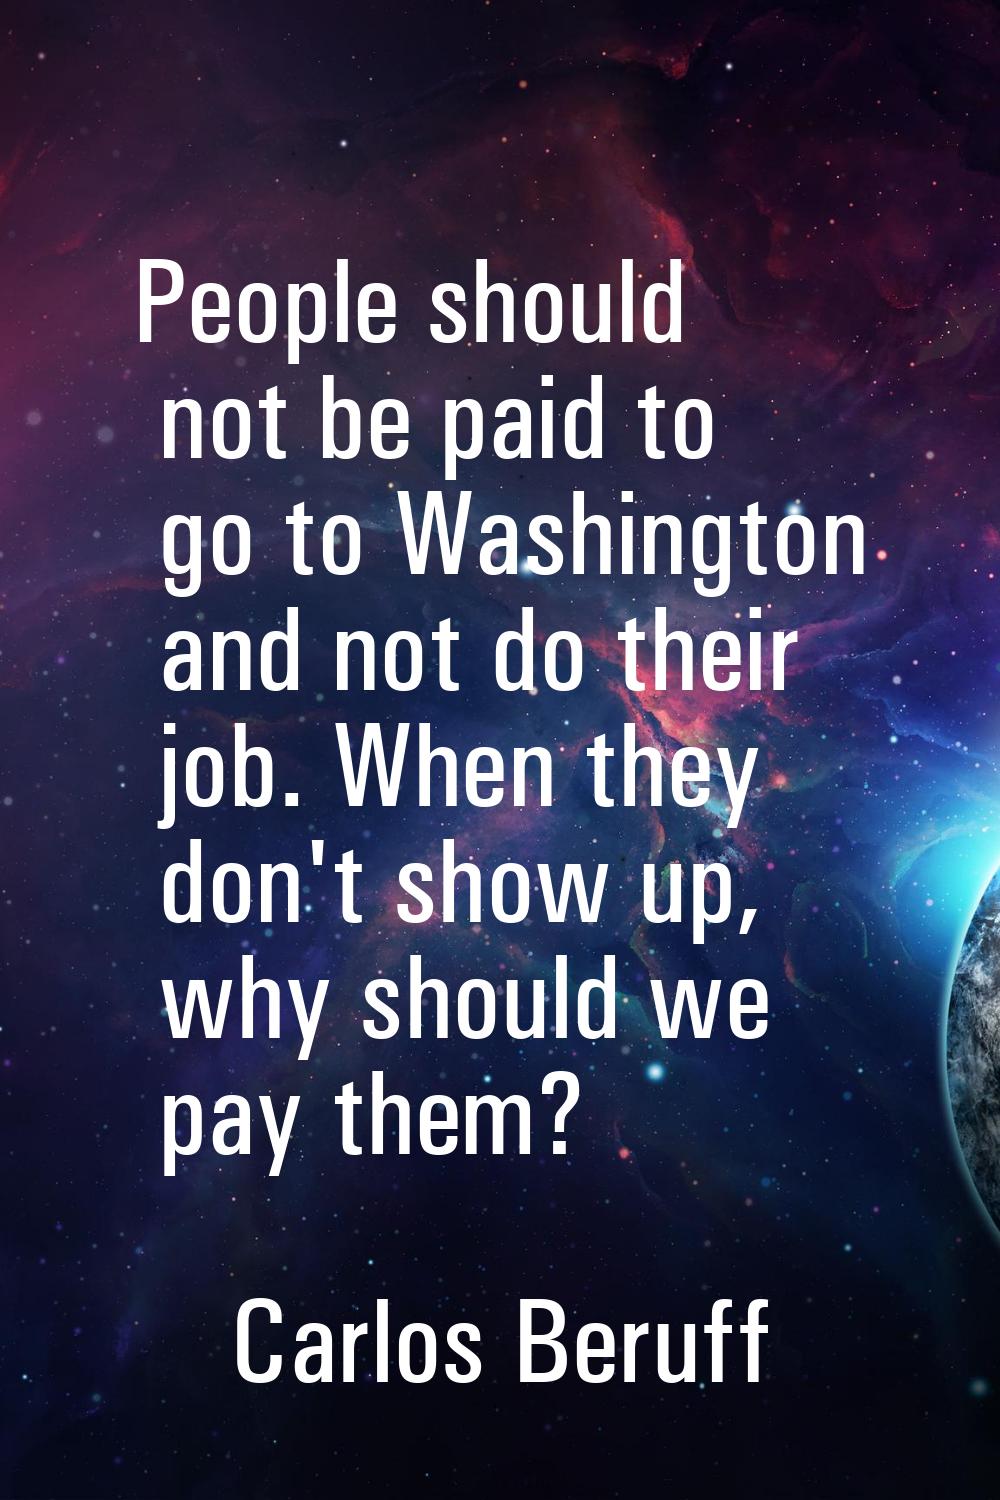 People should not be paid to go to Washington and not do their job. When they don't show up, why sh